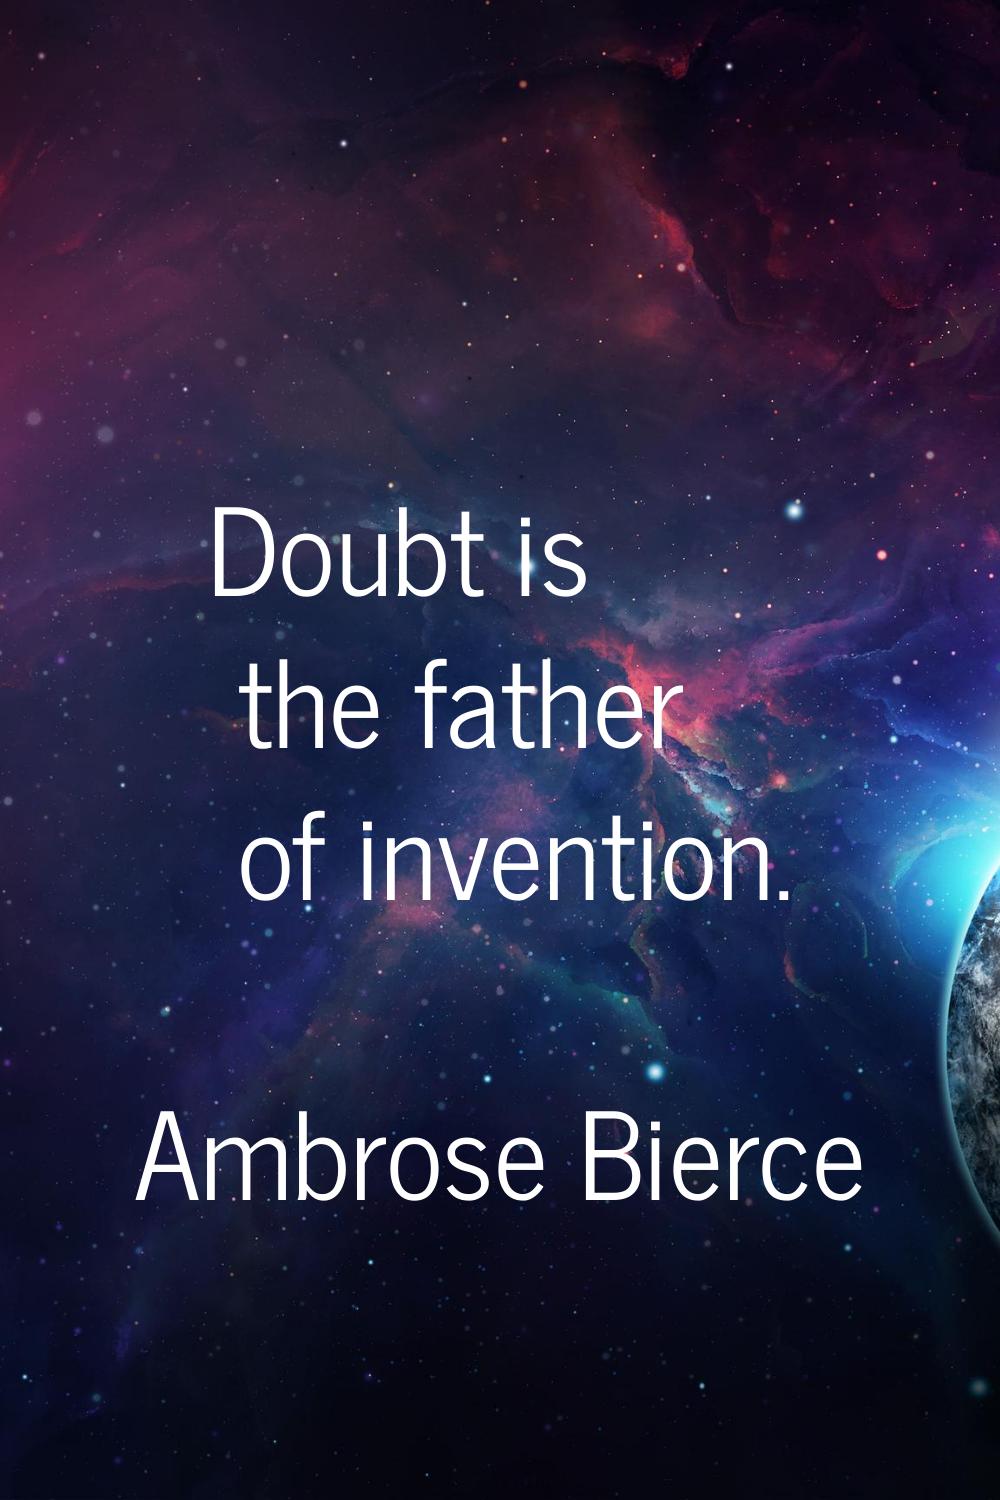 Doubt is the father of invention.